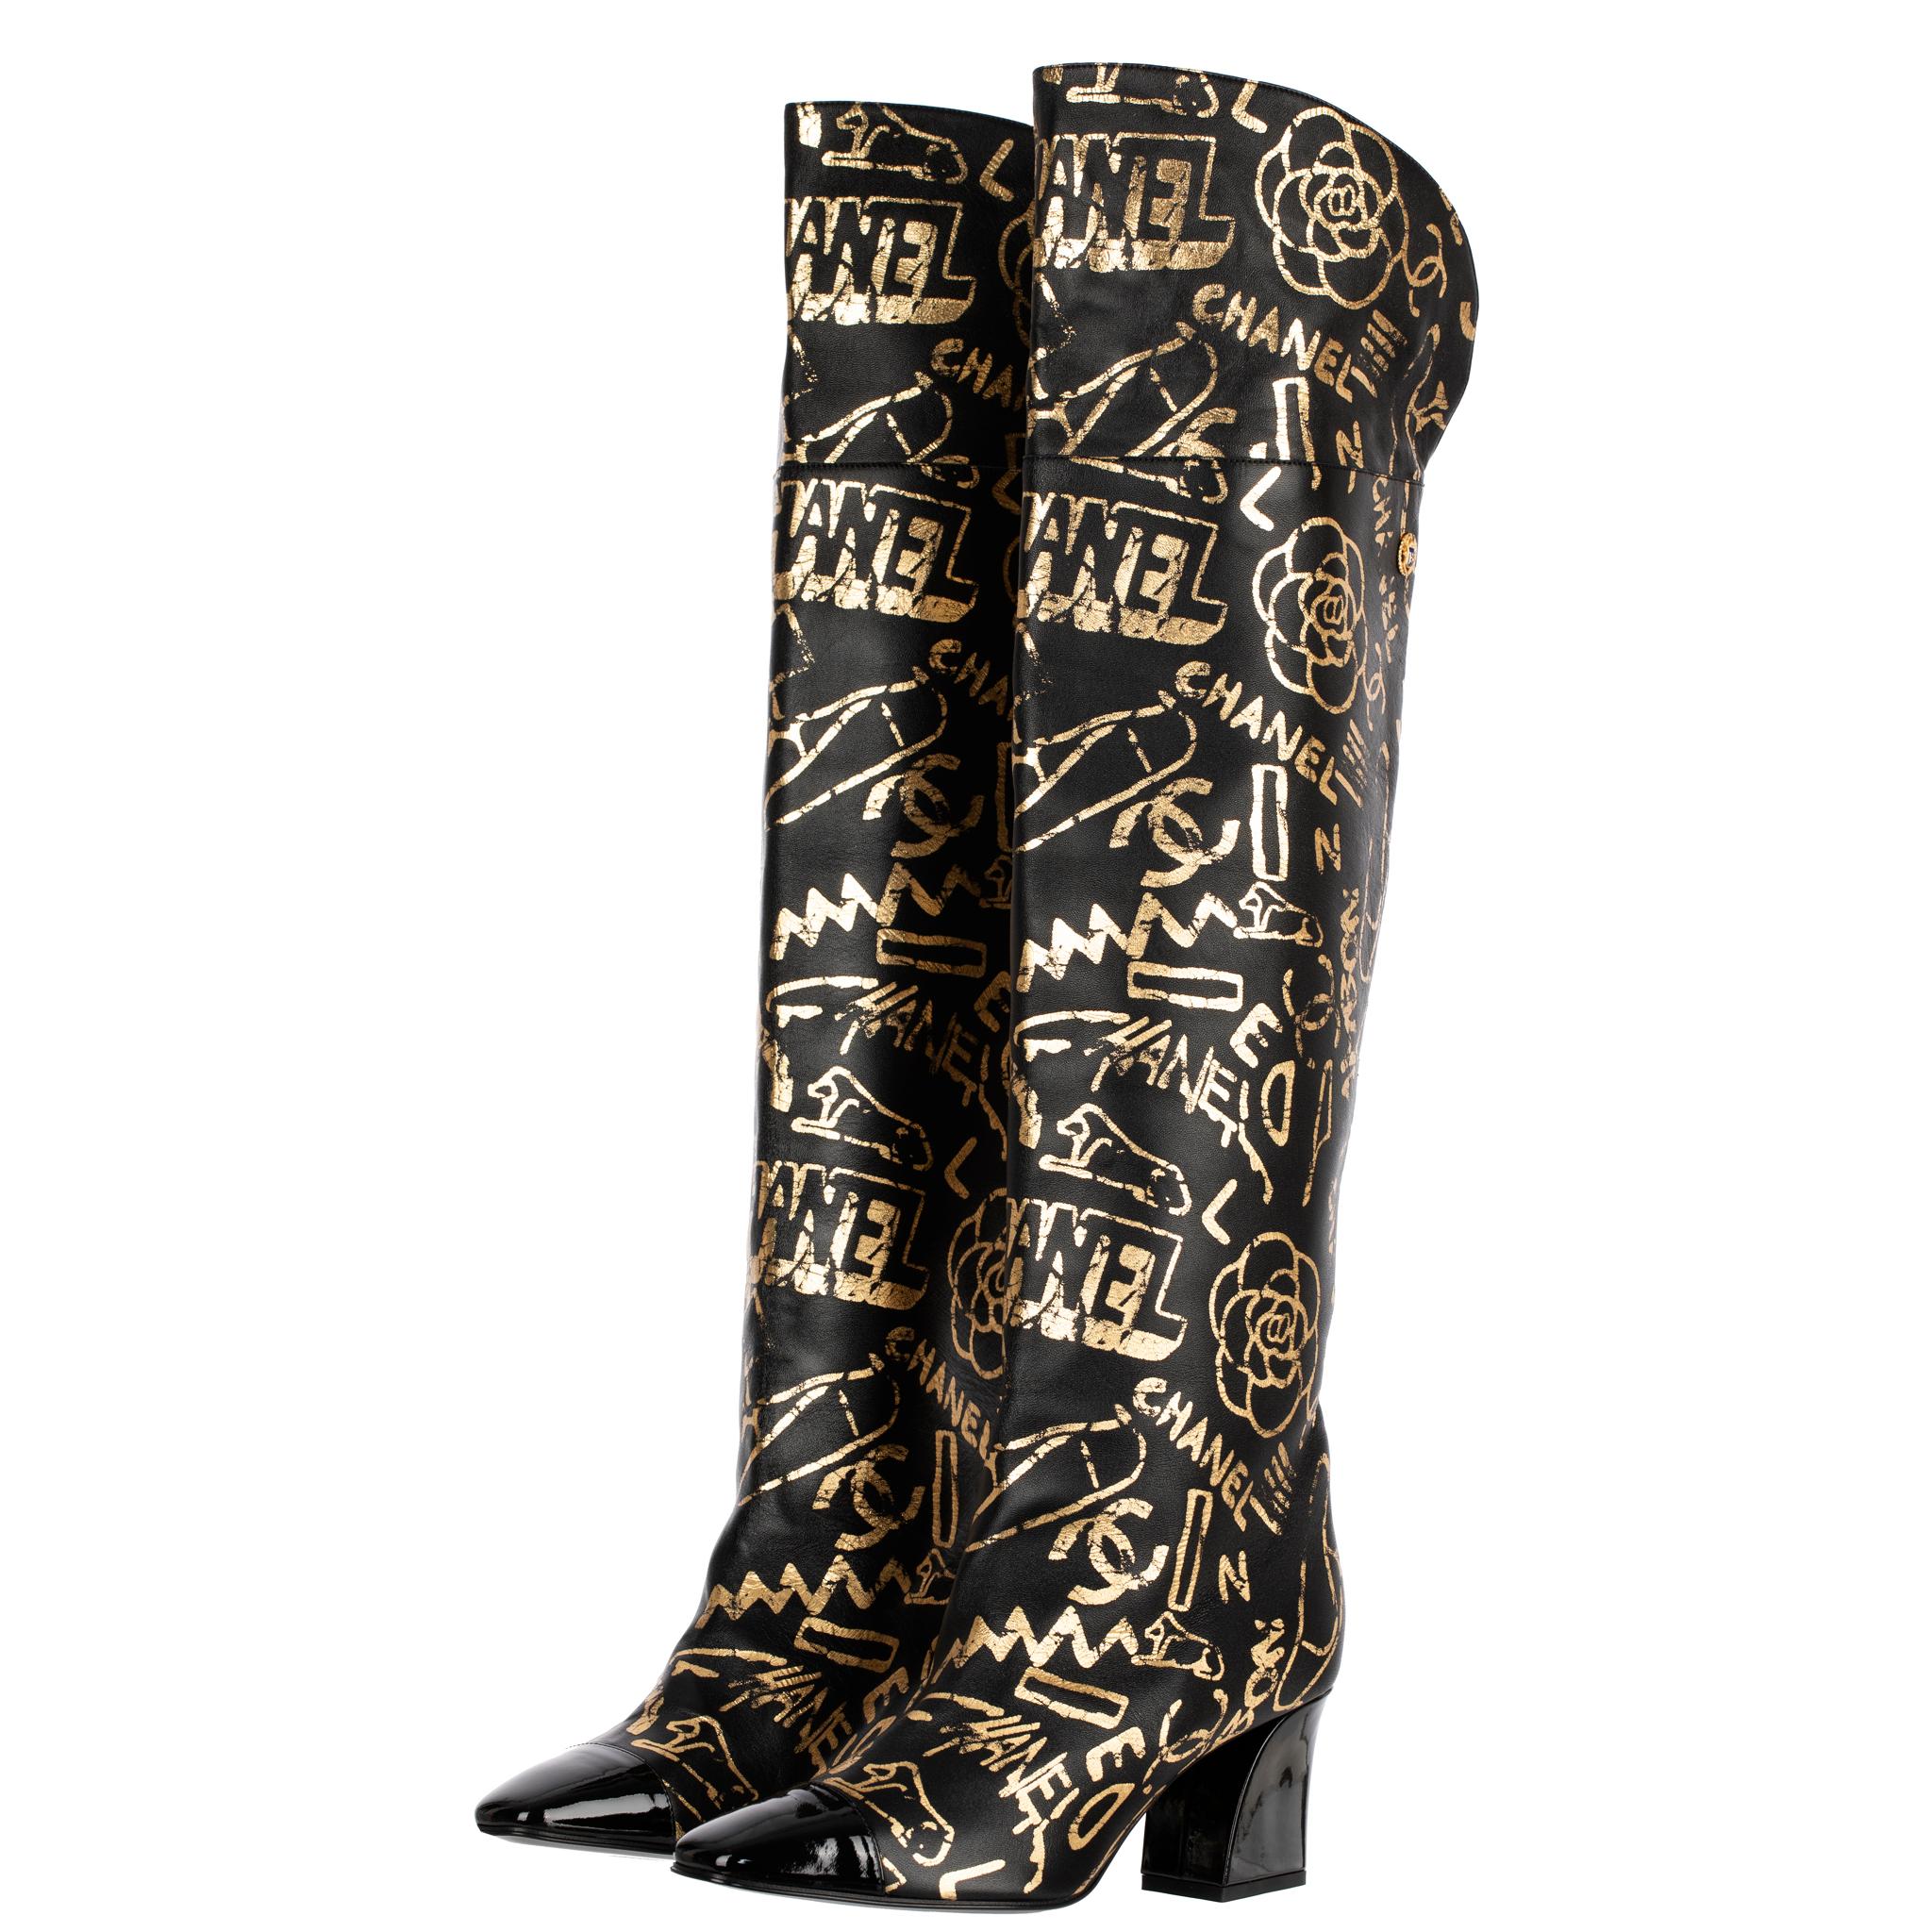 Be the envy of your friends with these collectable Chanel Egyptian Thigh High Boots. Crafted from the designer's iconic Egyptian collection, these boots have never been worn and are sure to be a collector's item. Comfortable and stylish, these boots